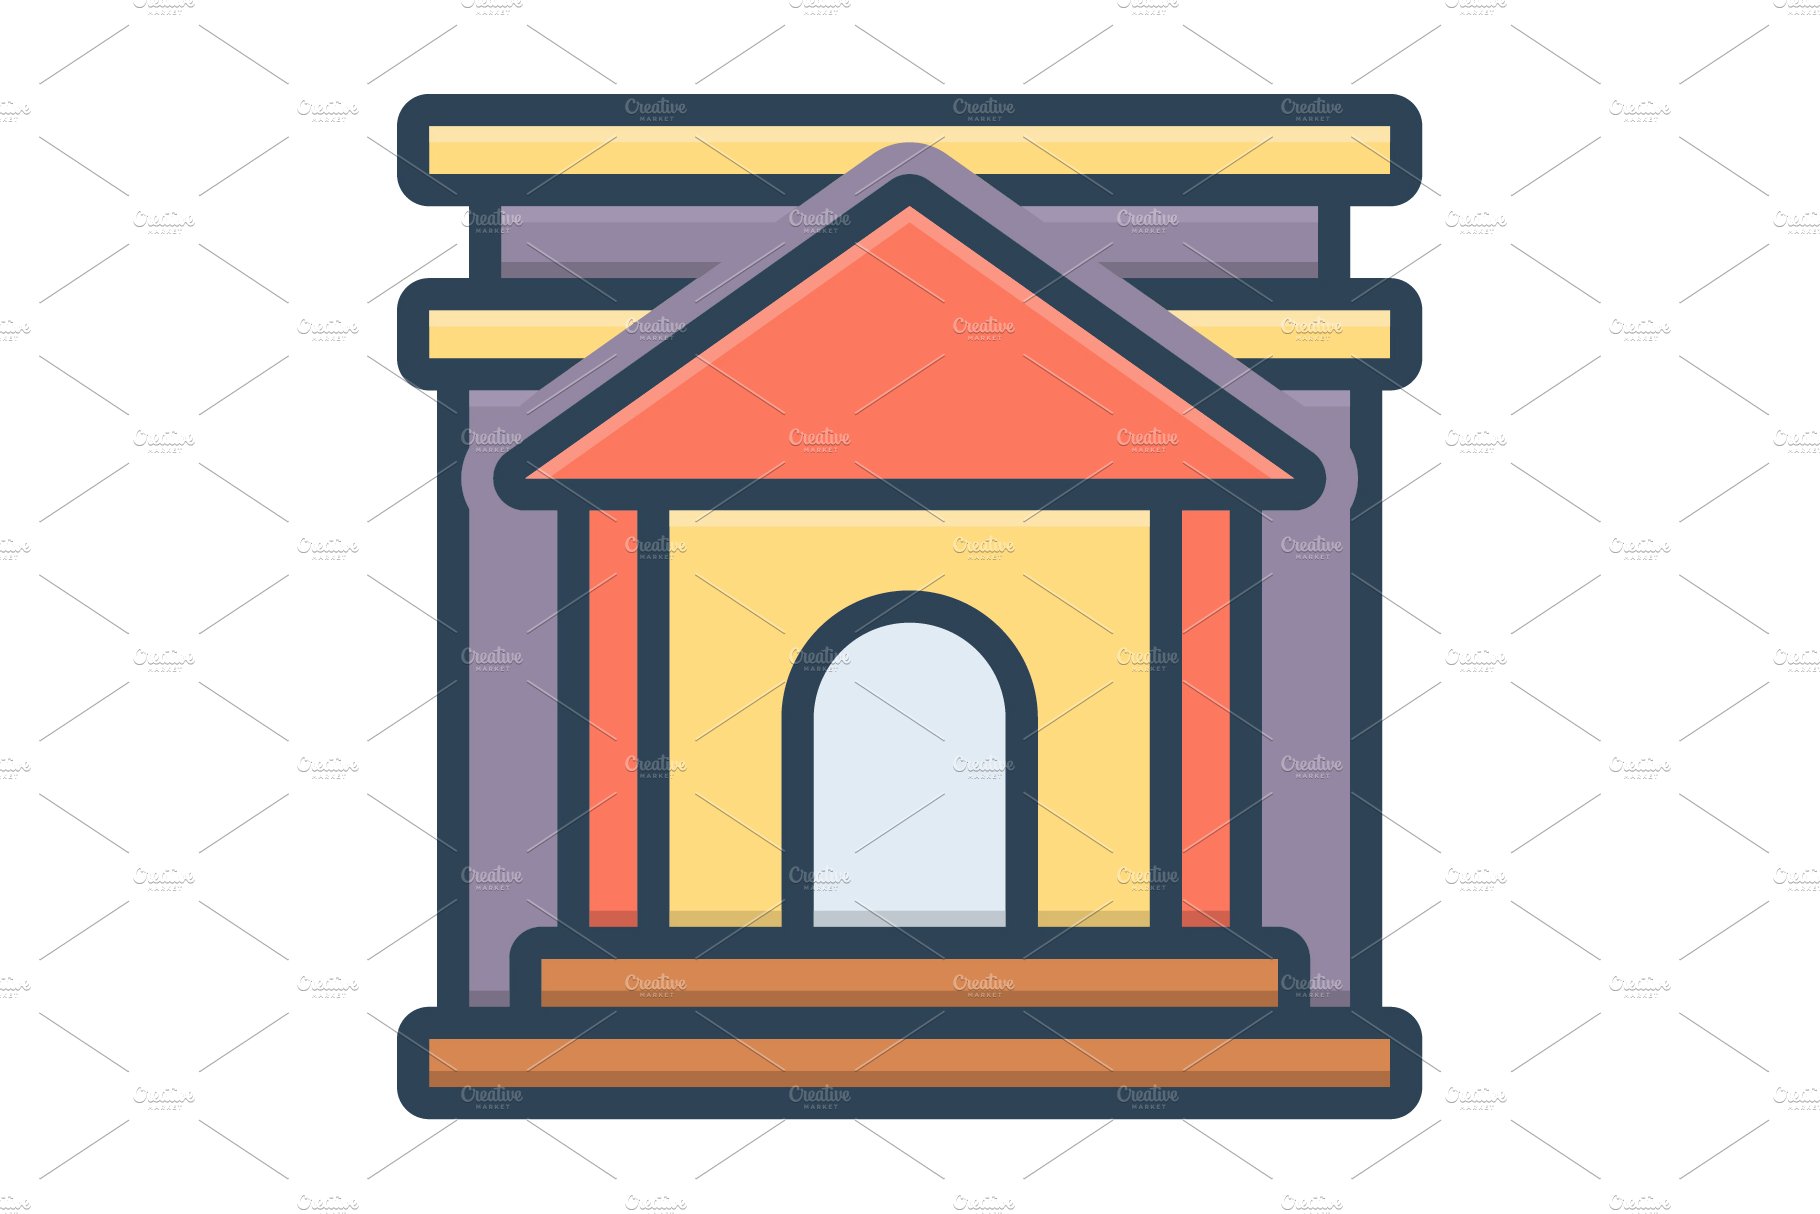 Bank building icon cover image.